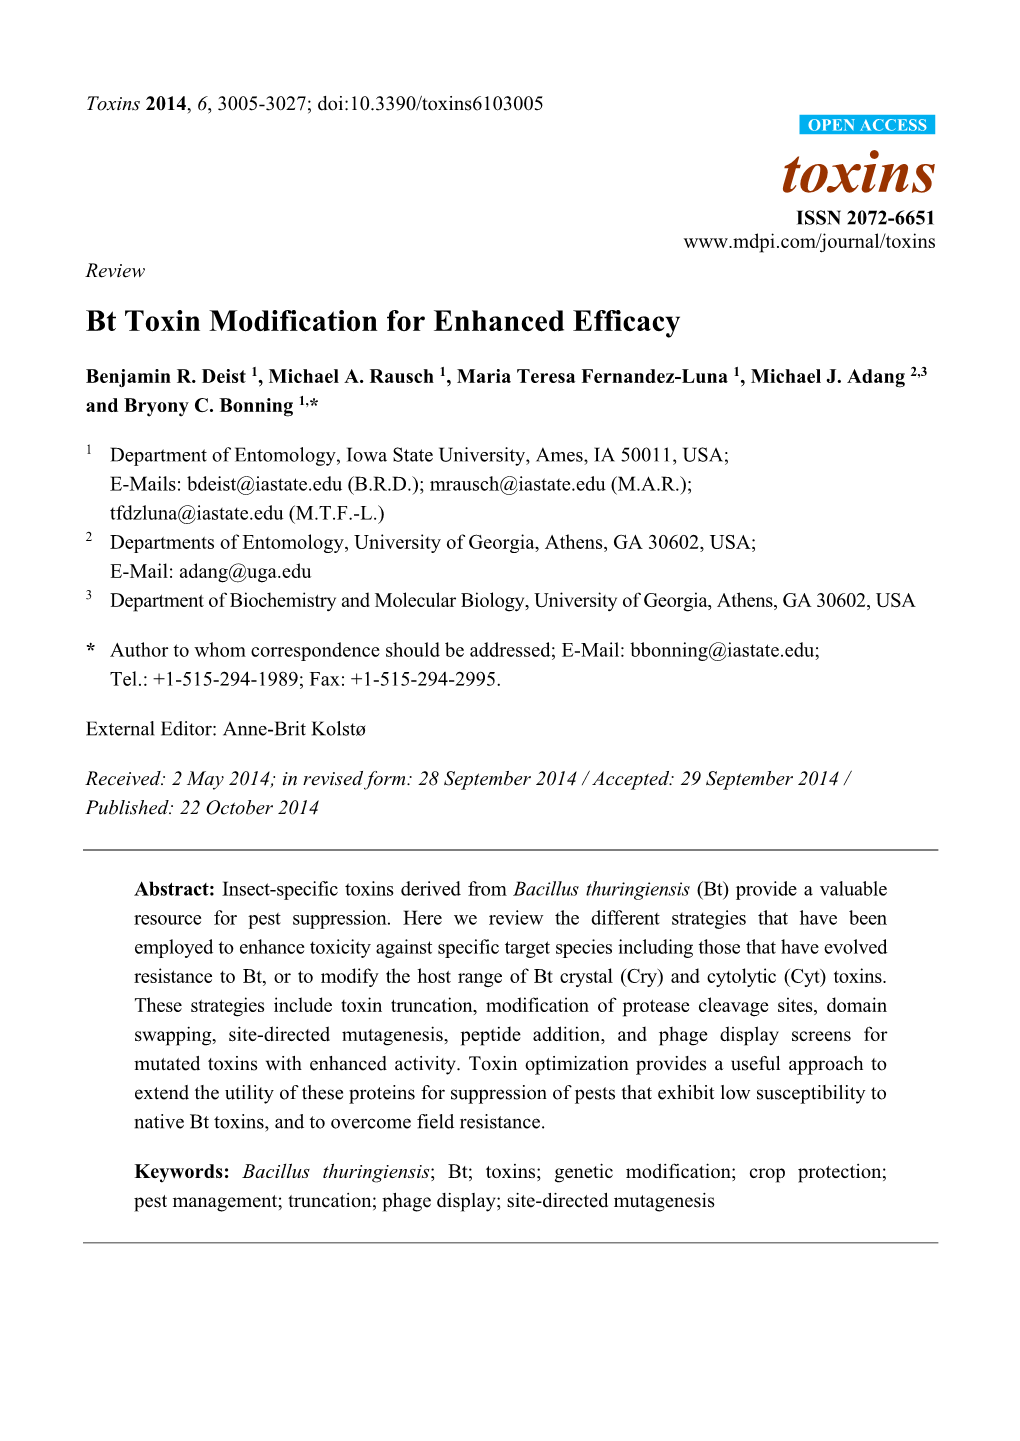 Bt Toxin Modification for Enhanced Efficacy